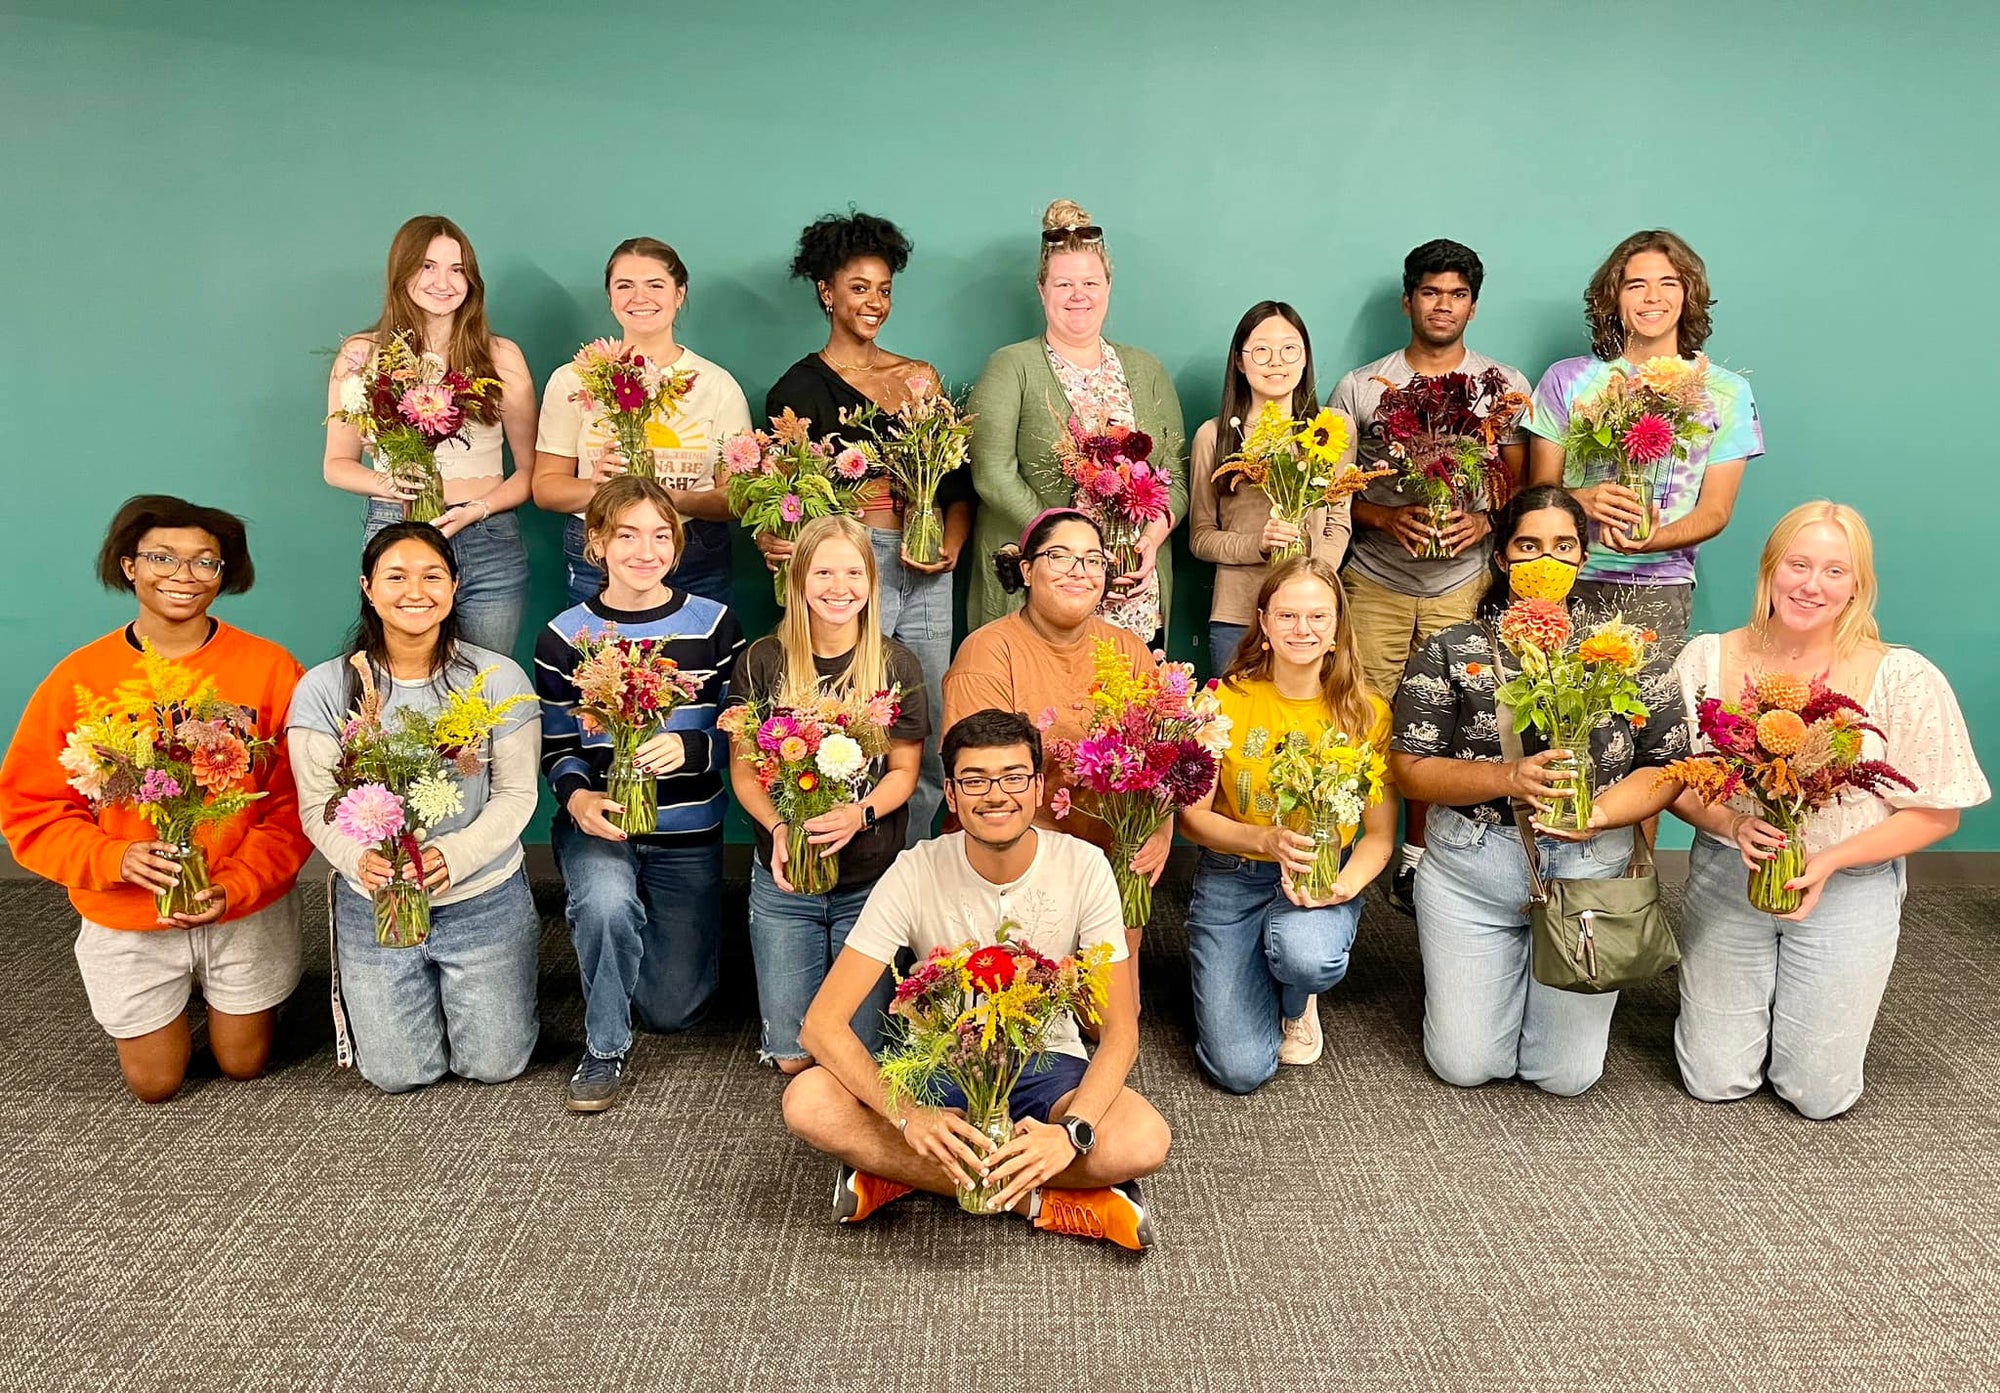 Teaching a Floral Arranging Class at UIUC